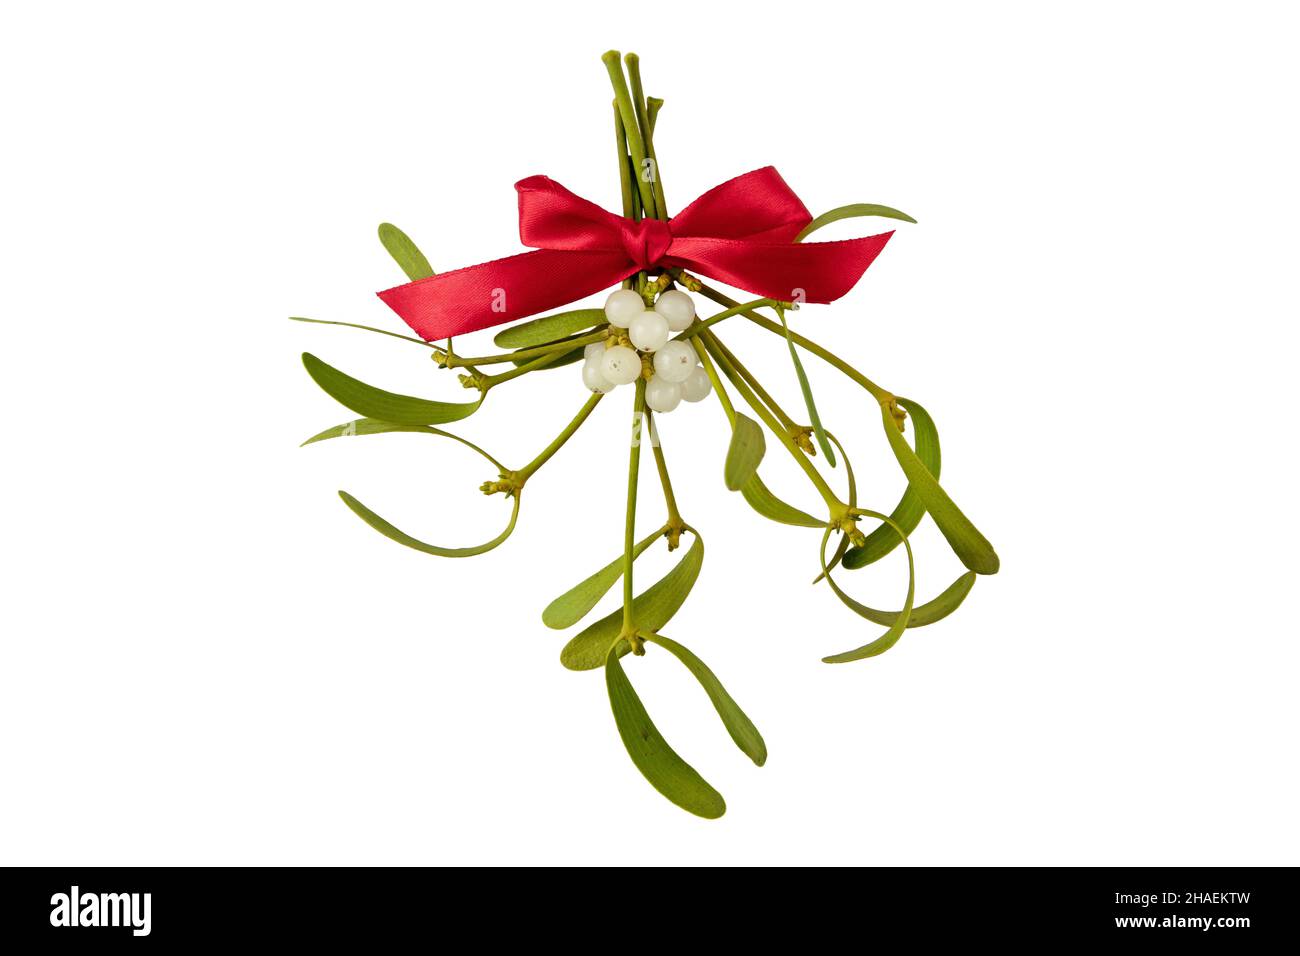 Mistletoe bunch with white berries and green leaves and red satin bow . Christmas decoration isolated on white. Stock Photo